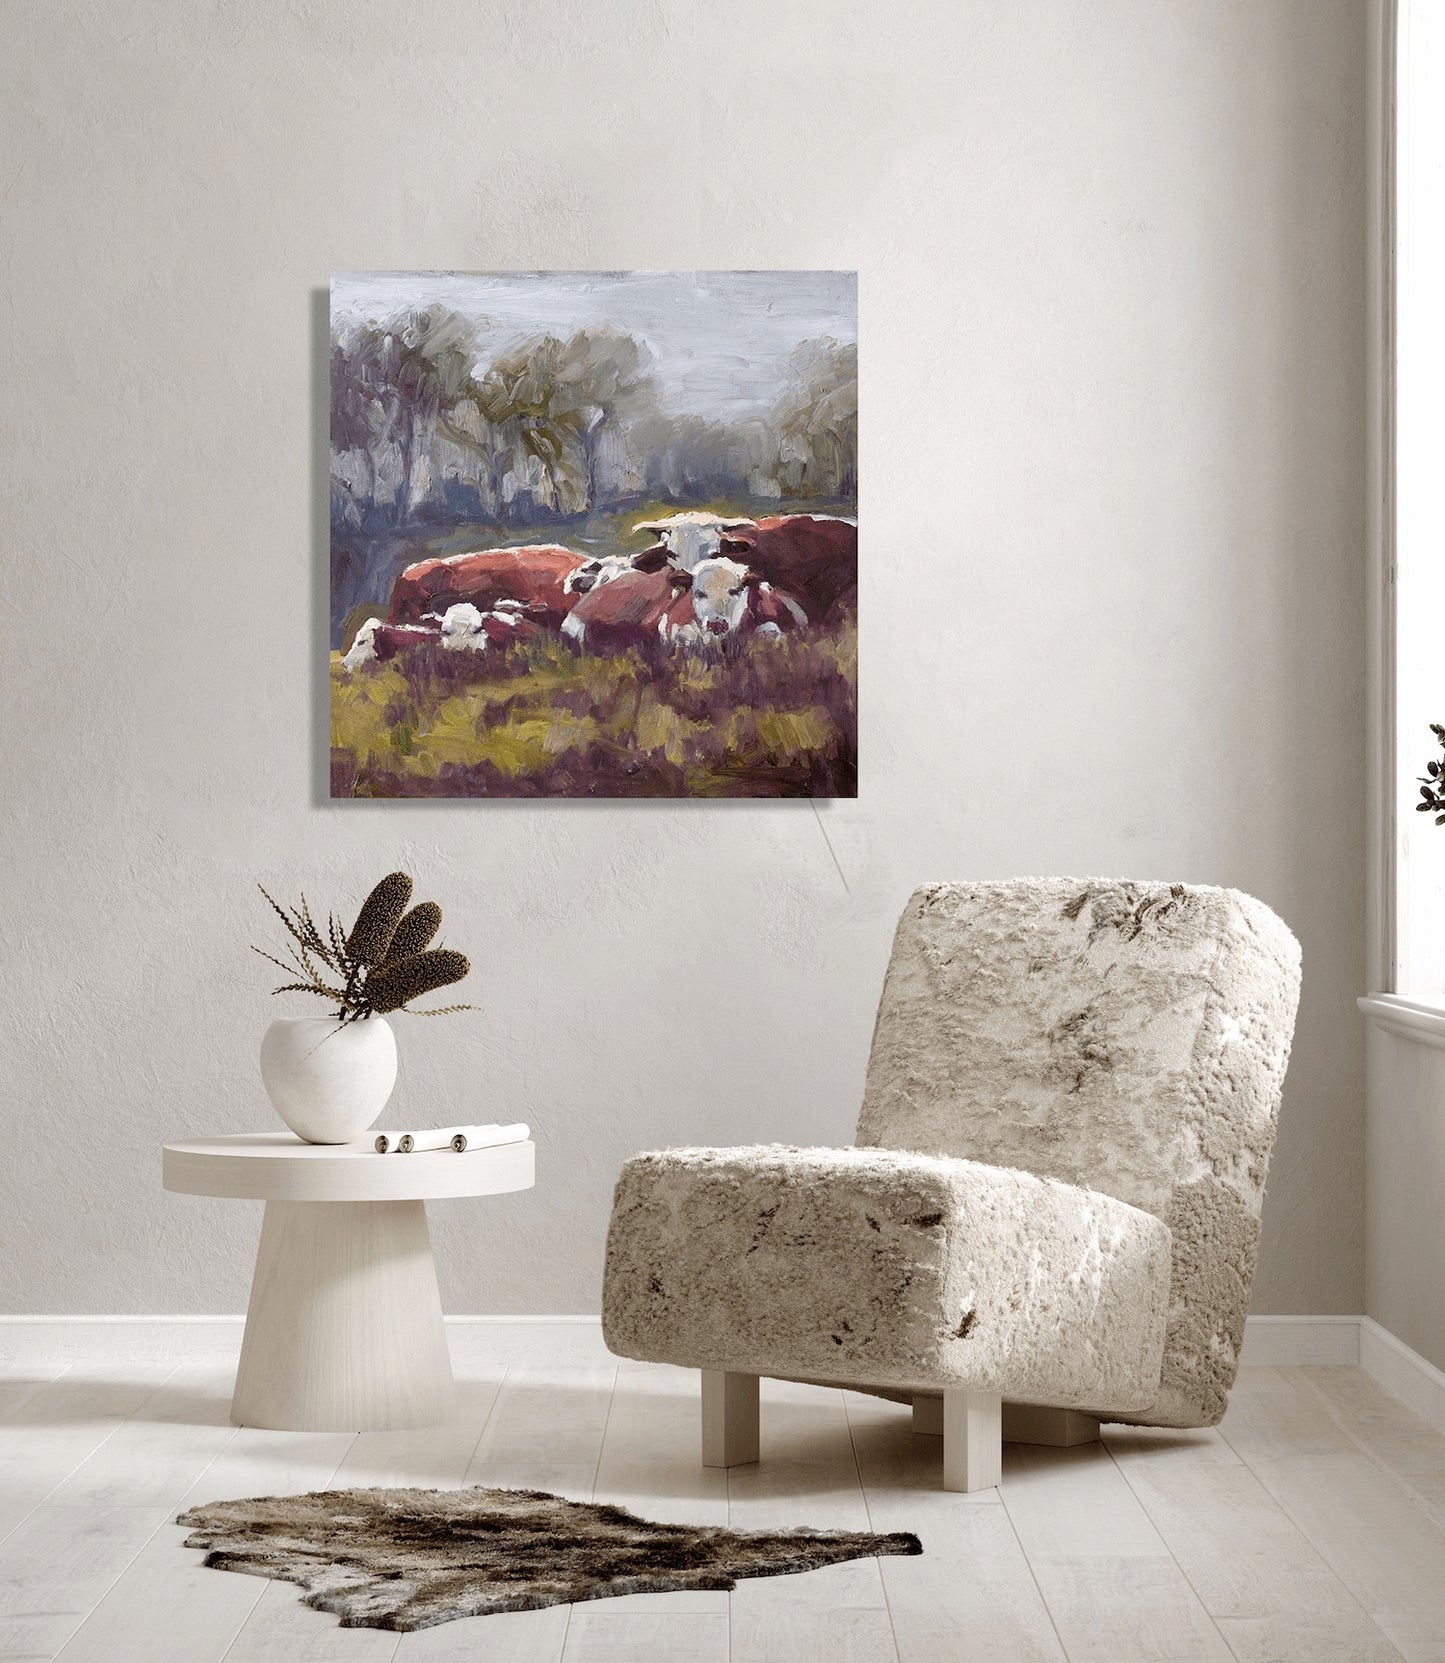 Five Cows Glossy Poster Print